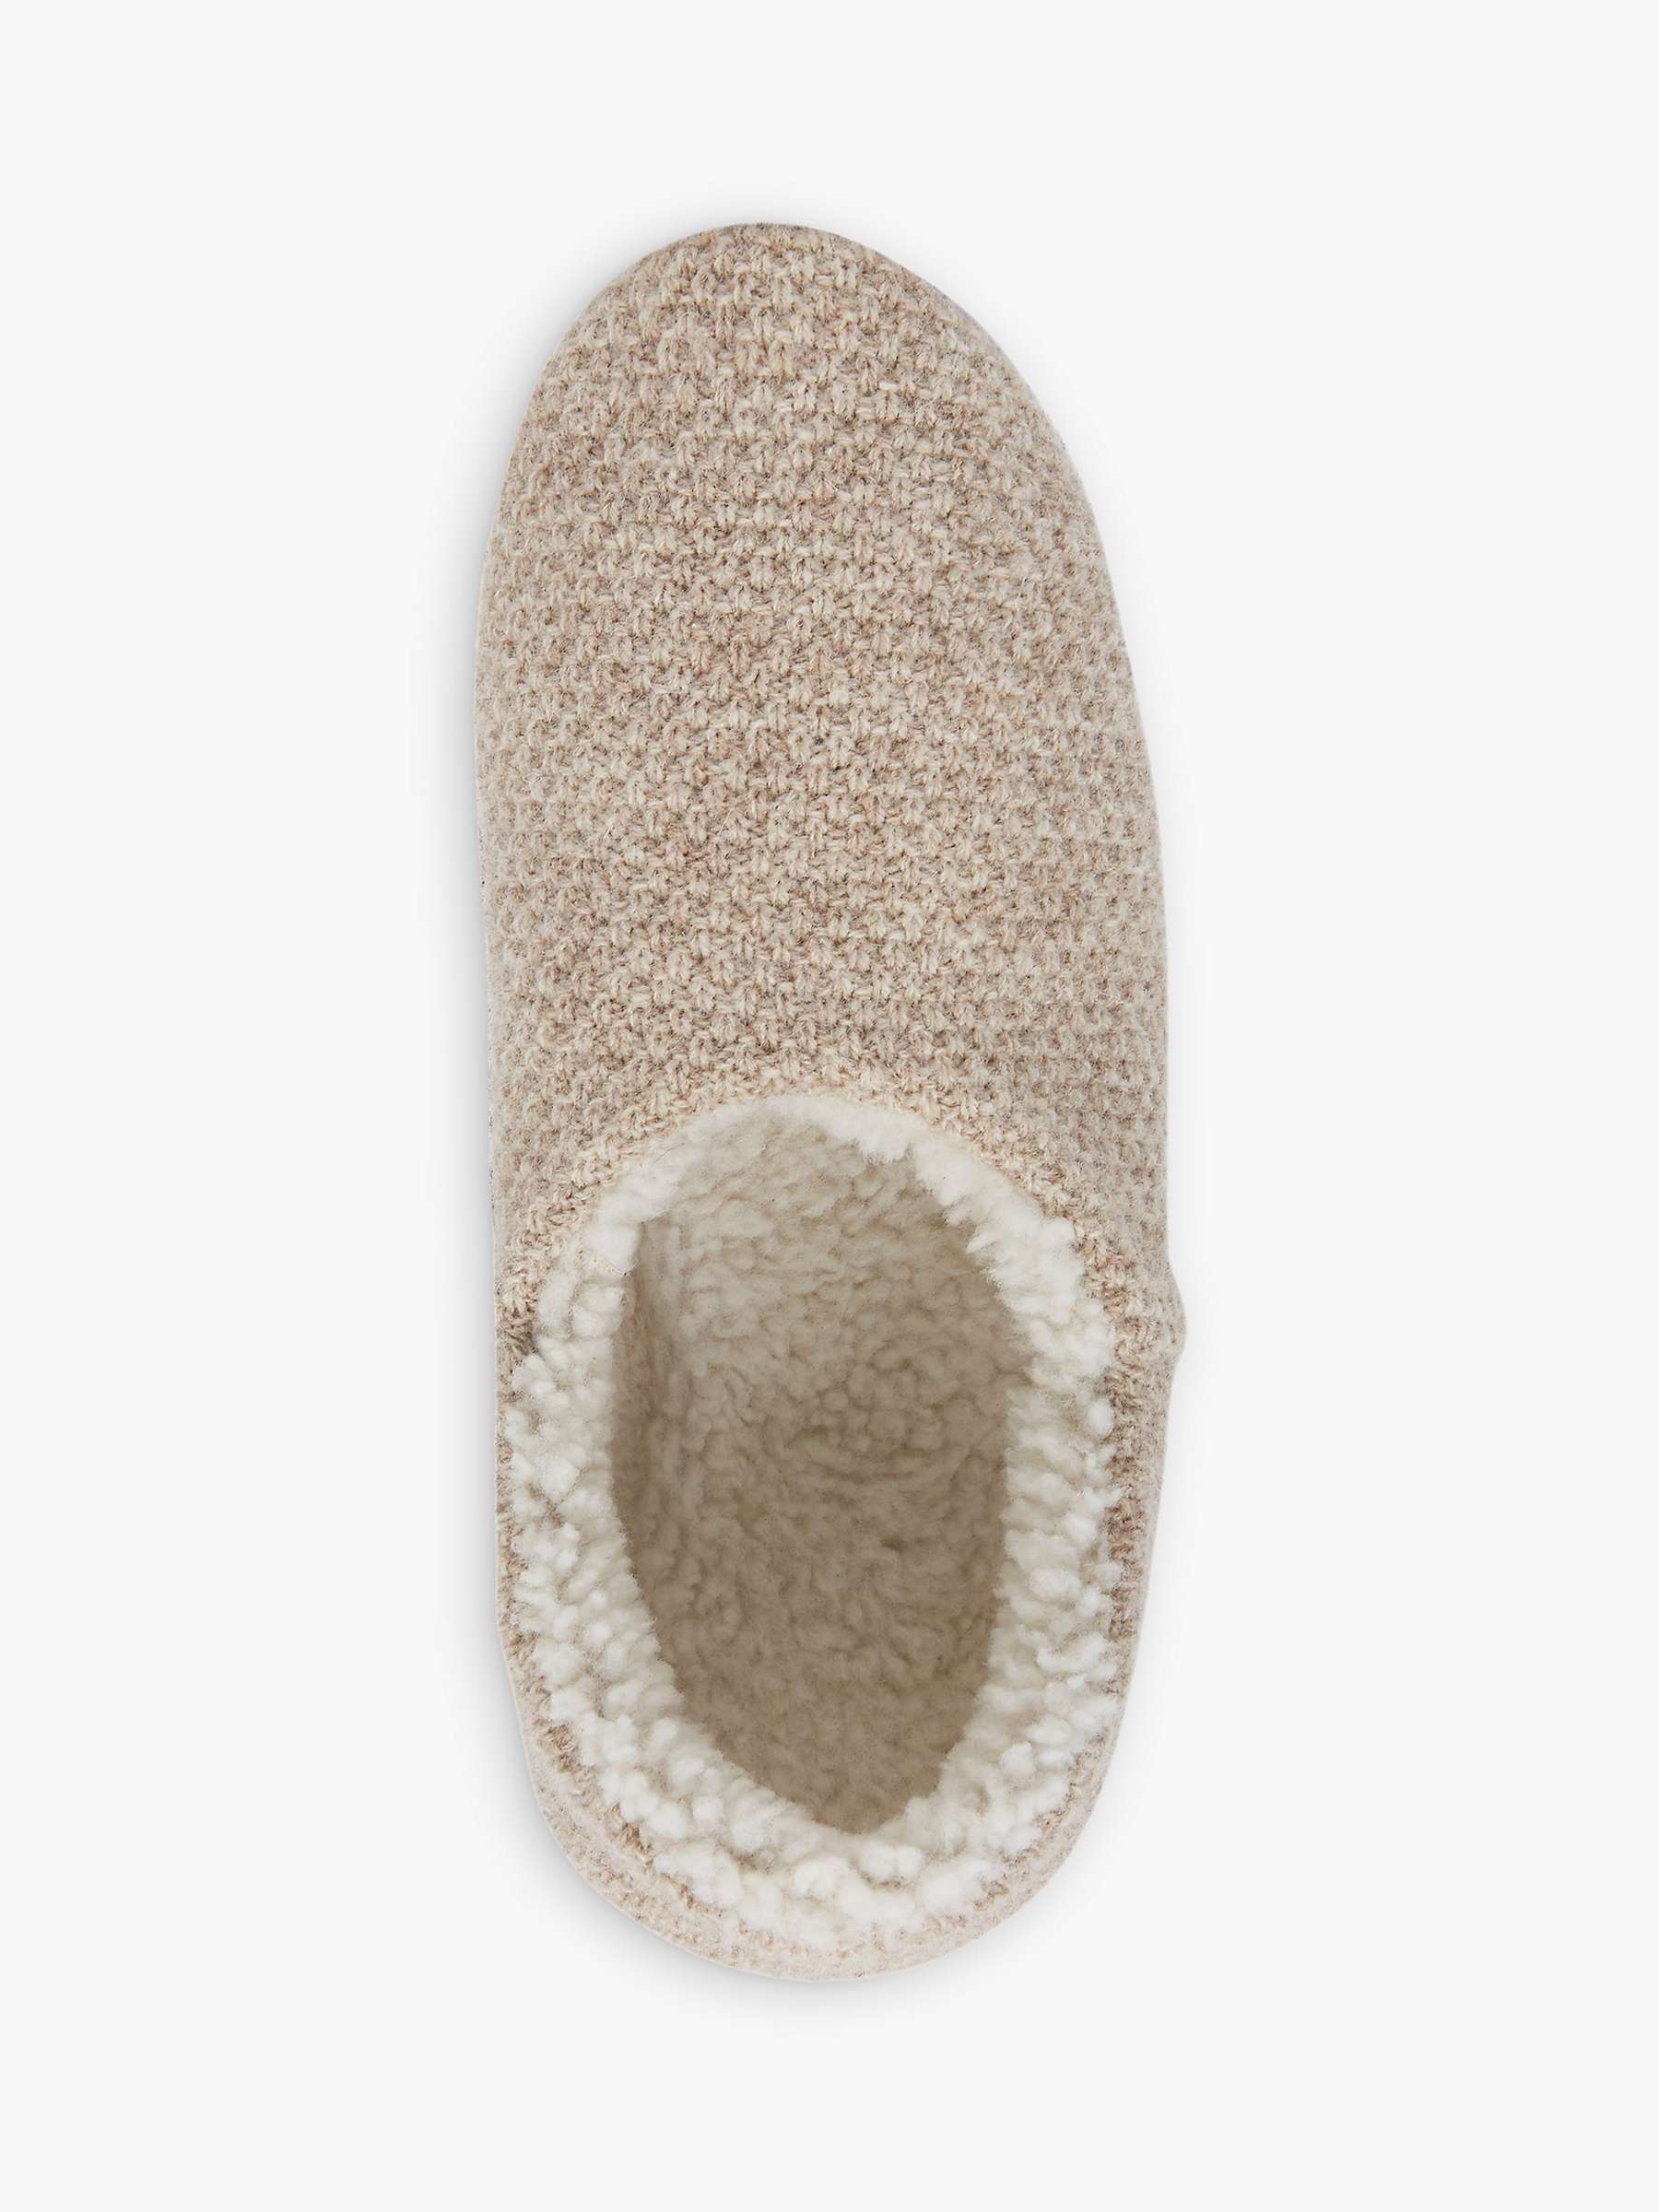 Buy Celtic & Co. Knitted Sheepskin Cocoon Slippers, Oatmeal Online at johnlewis.com